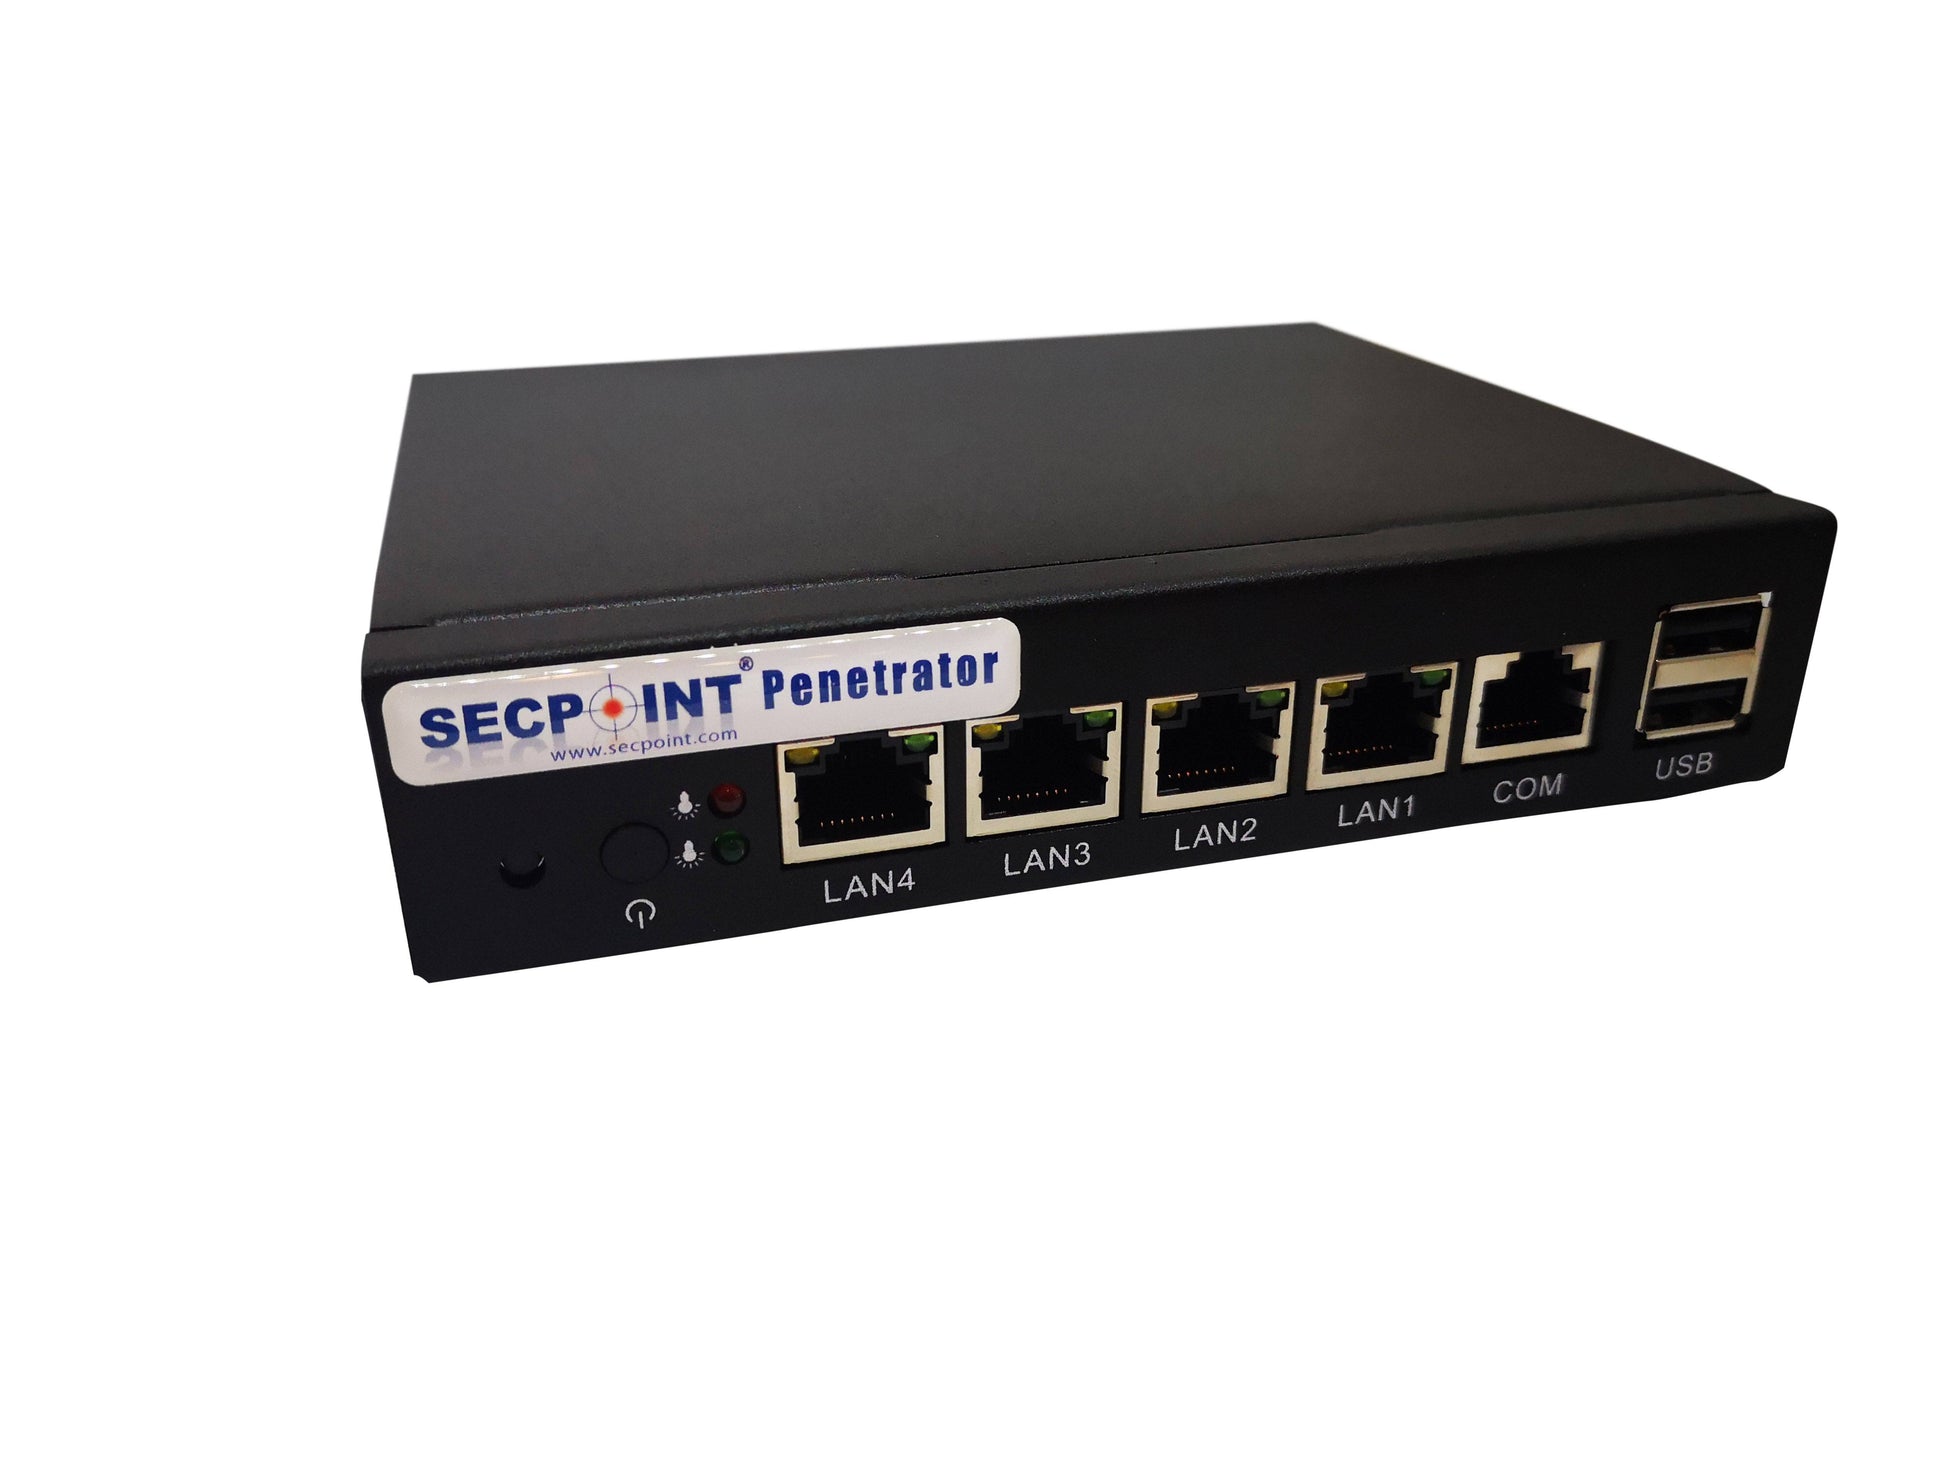 SecPoint Penetrator S9 - 8 IP Concurrent Scan License Vuln Scanning Appliance SFF (3 Years License) - SecPoint